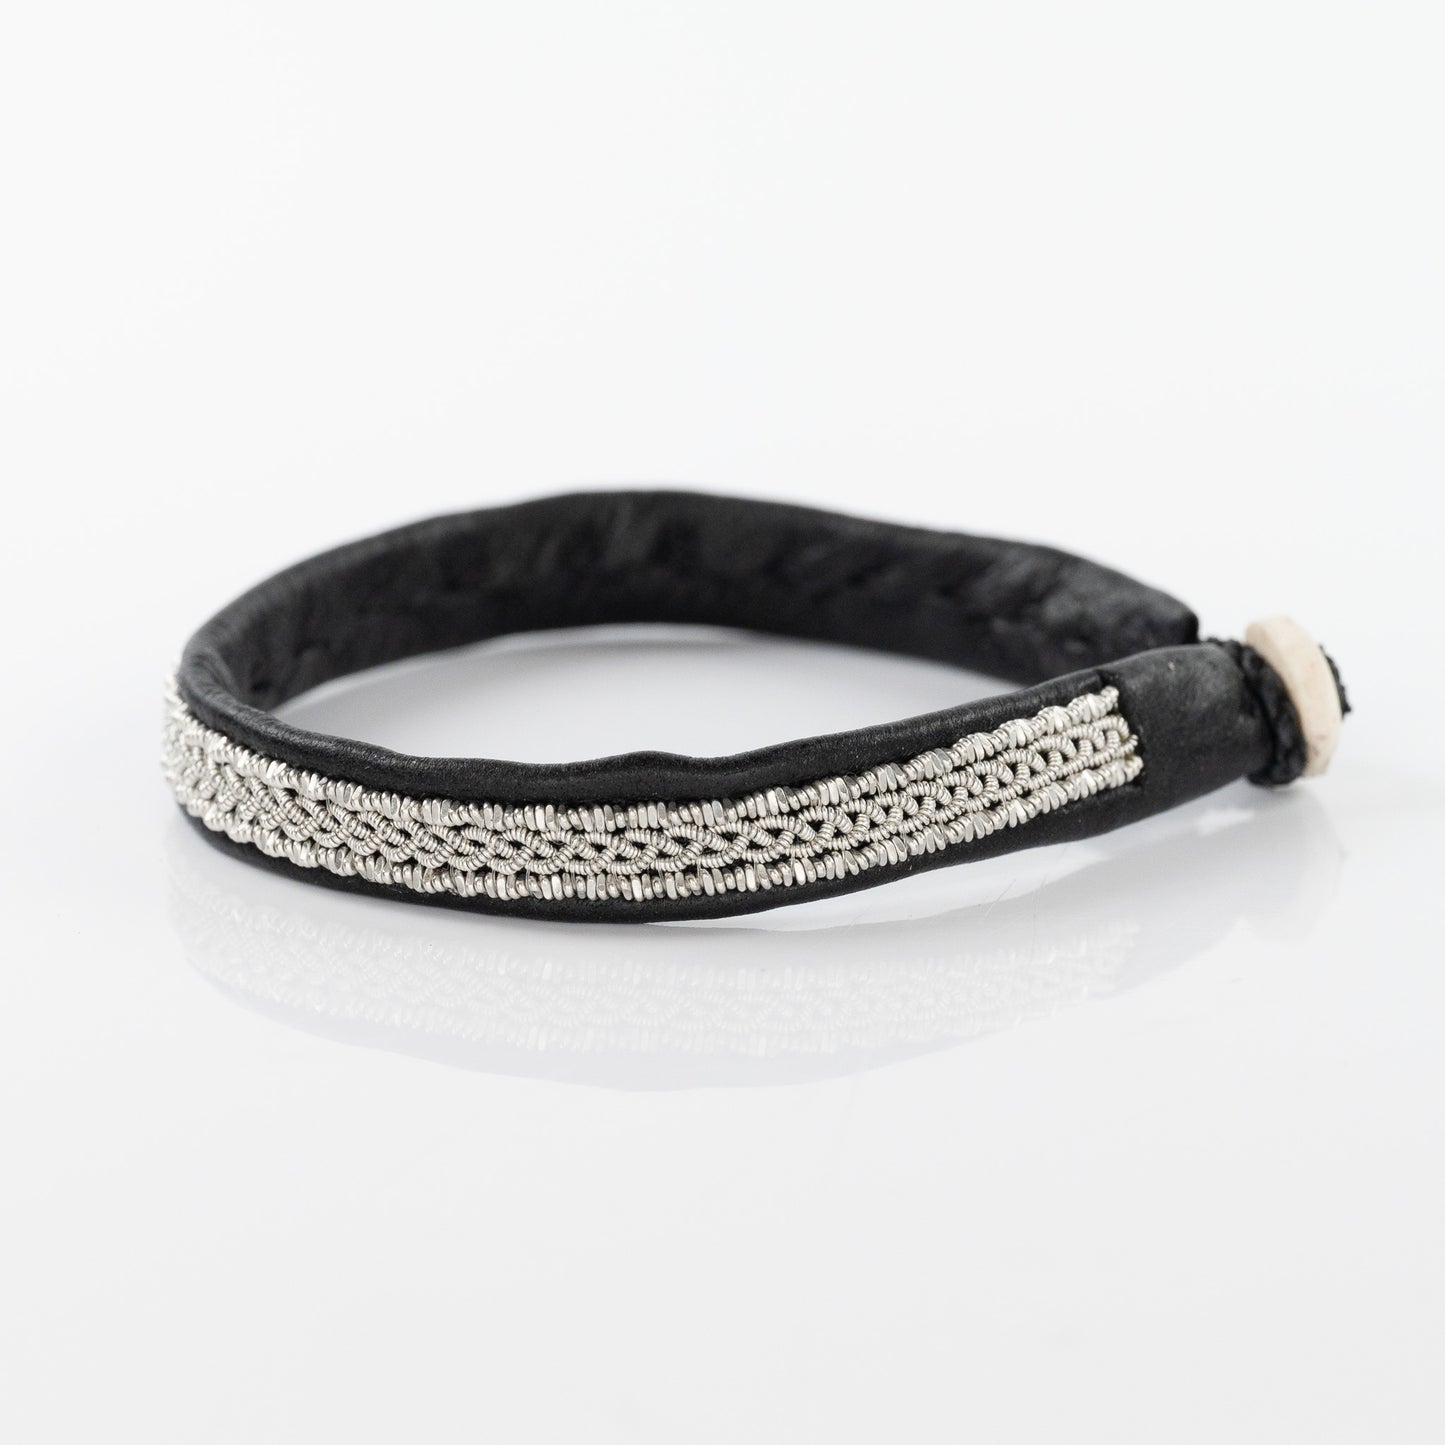 Tindra Braided Black Bracelet with Crimped Coil Boarder